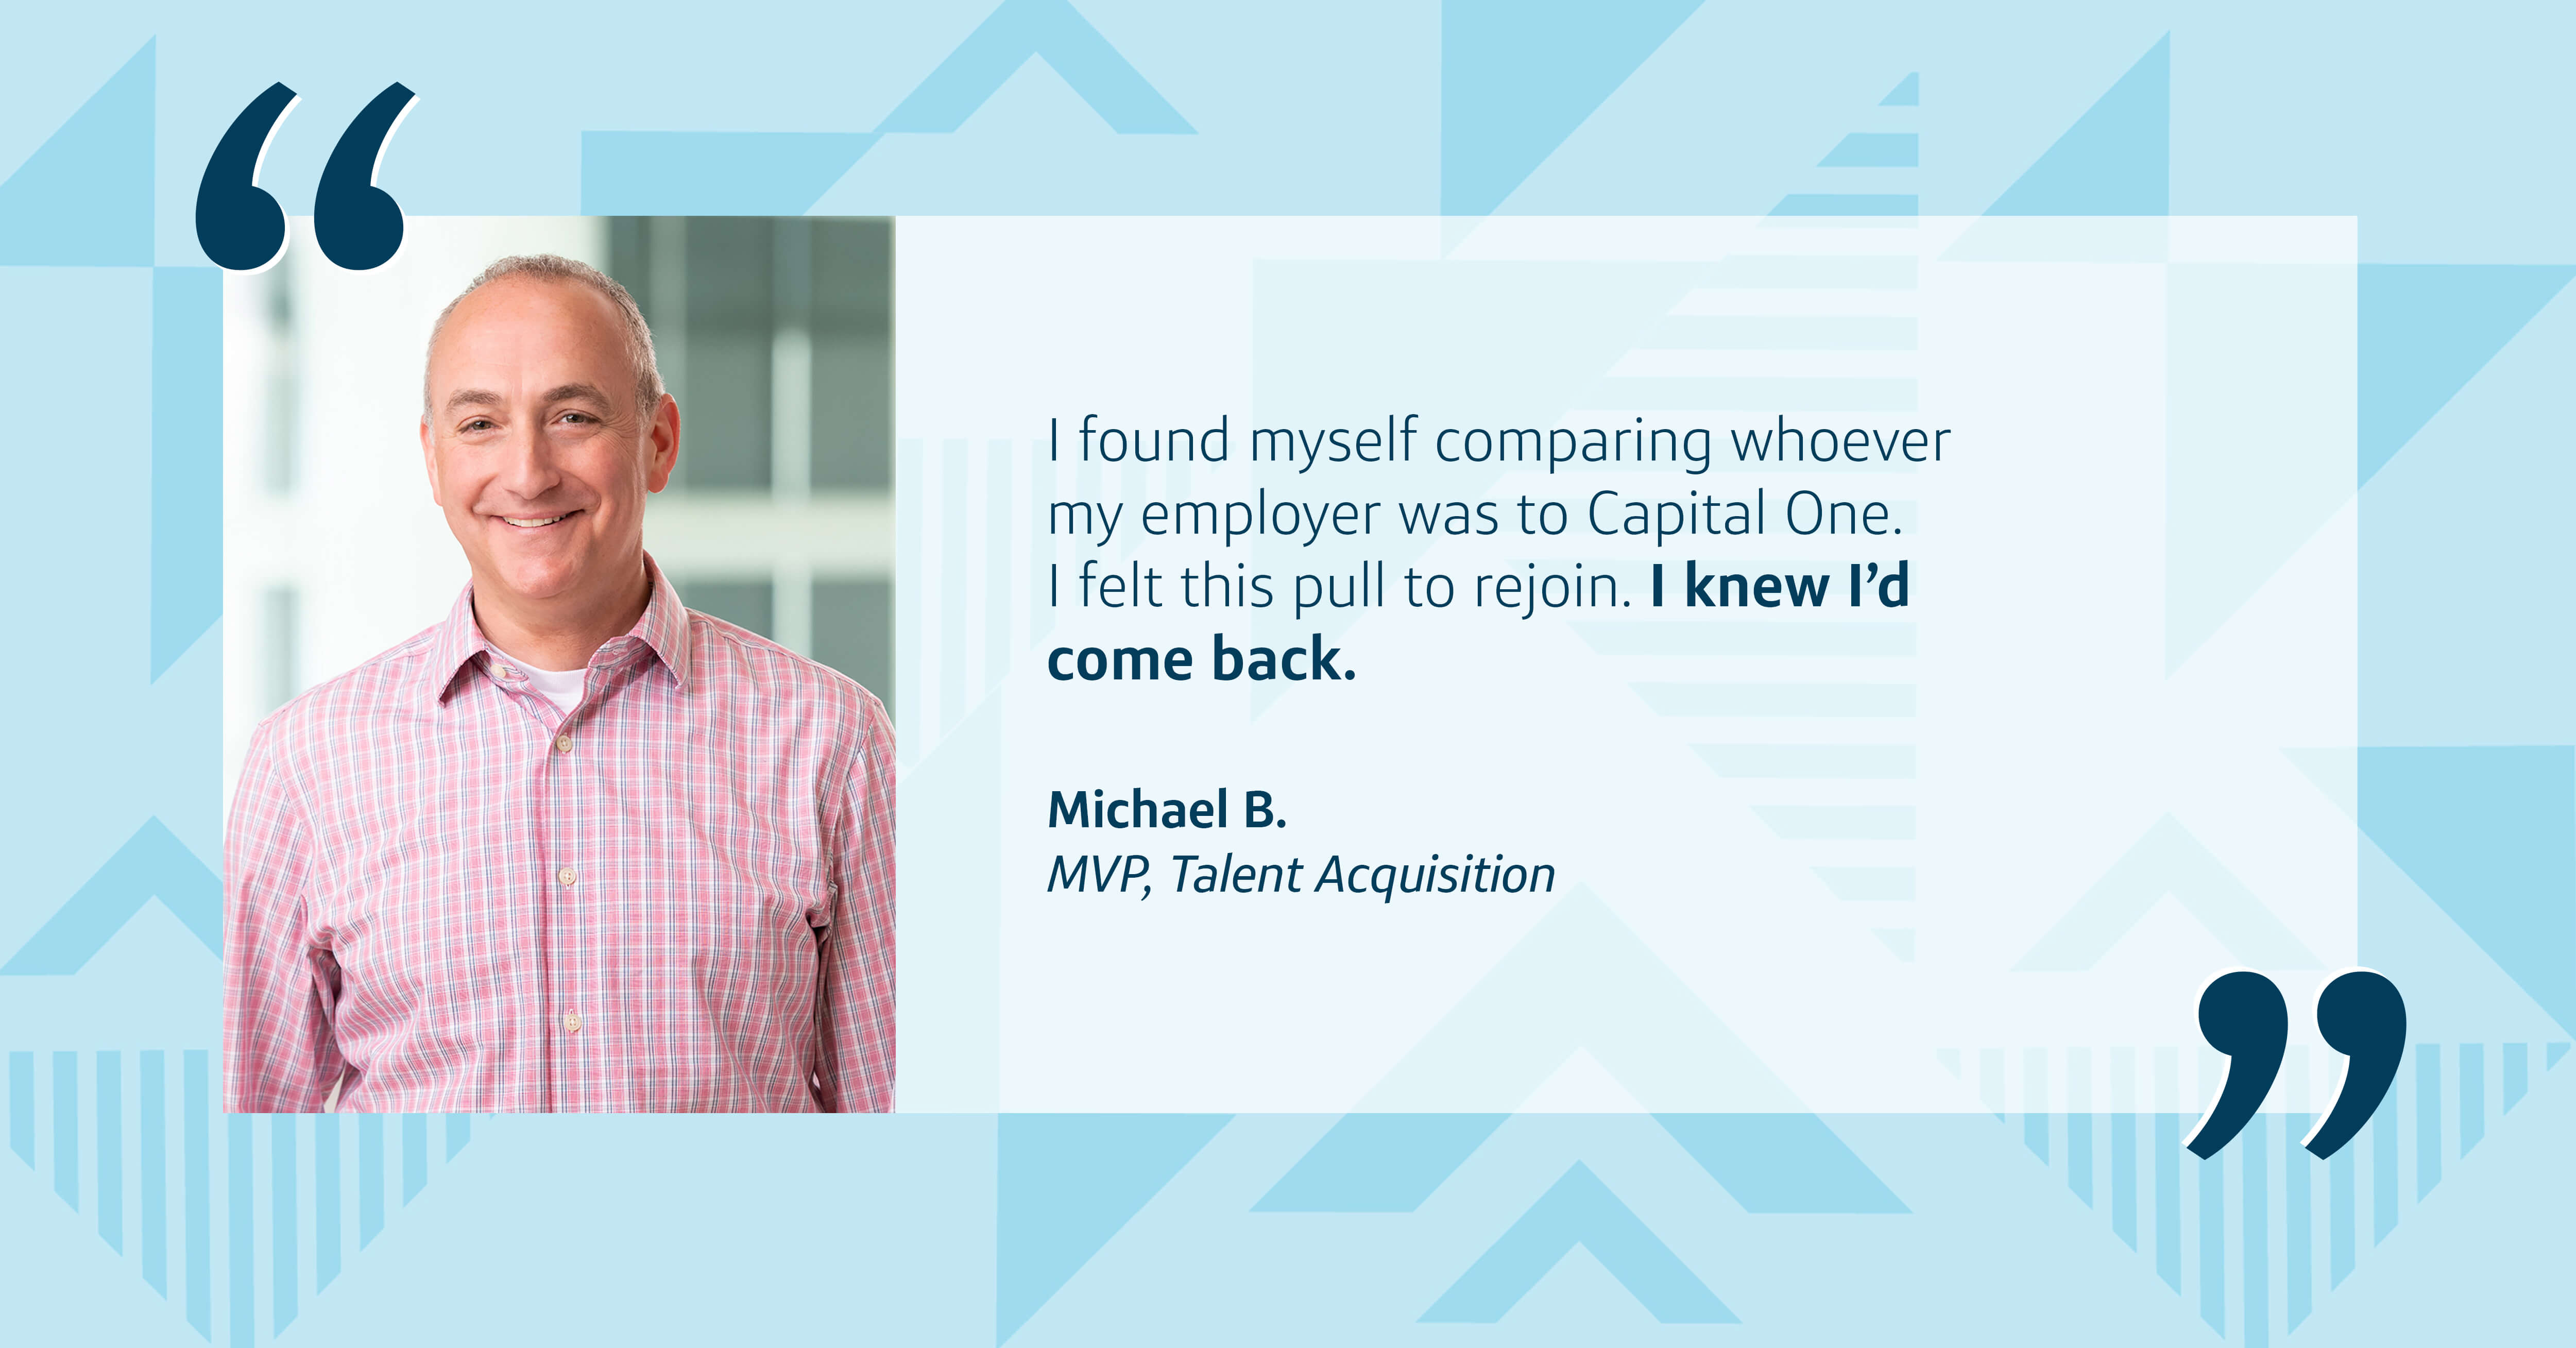 A headshot of Capital One leader Michael next to a quote from him that says, “I found myself comparing whoever my employer was to Capital One. I felt this pull to rejoin. I knew I’d come back.” All in front of a Capital One two-toned triangular background 